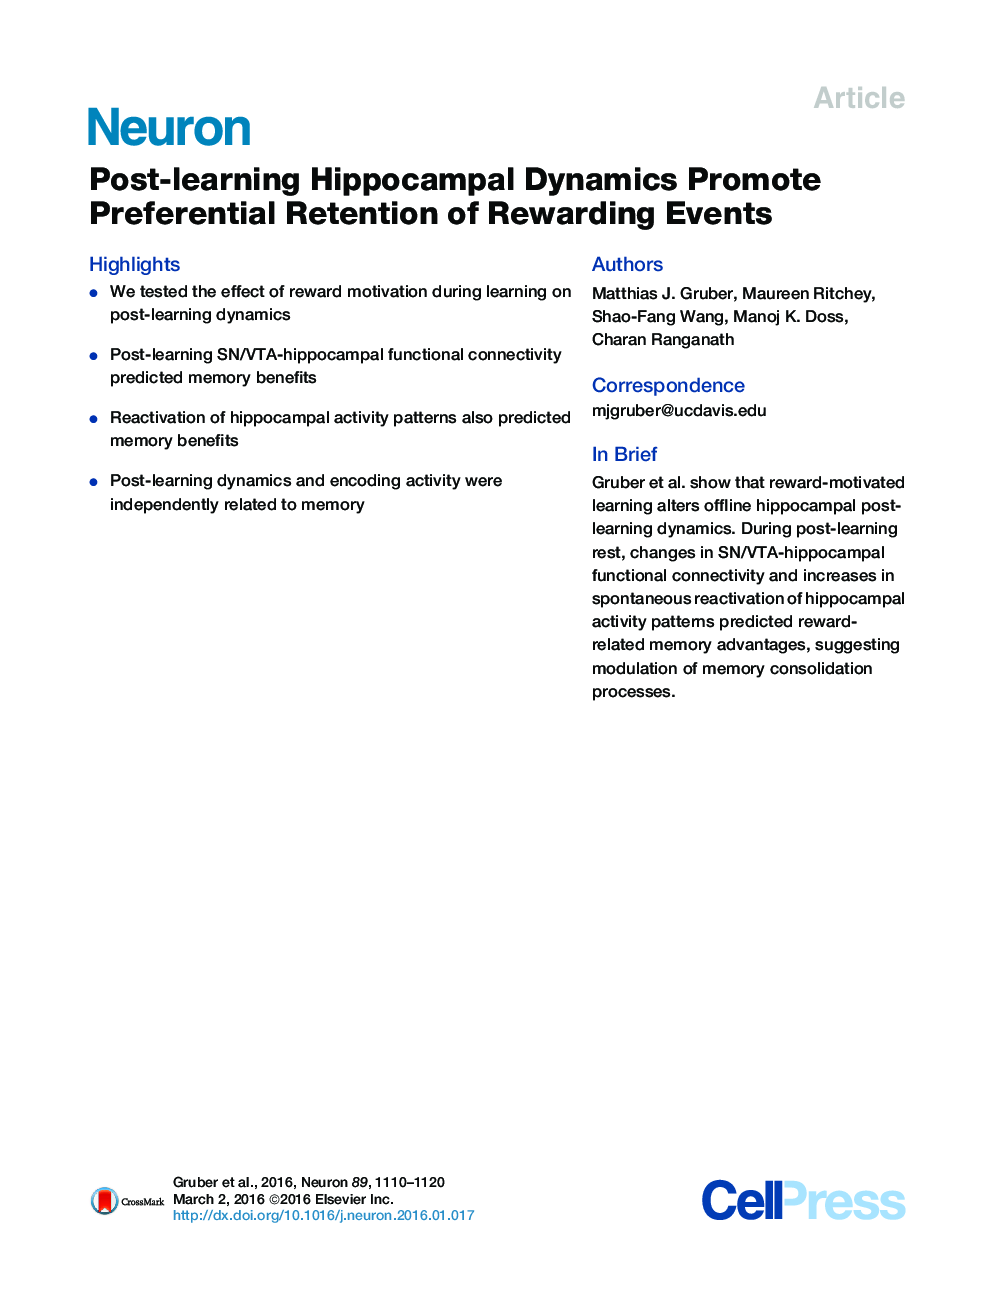 Post-learning Hippocampal Dynamics Promote Preferential Retention of Rewarding Events